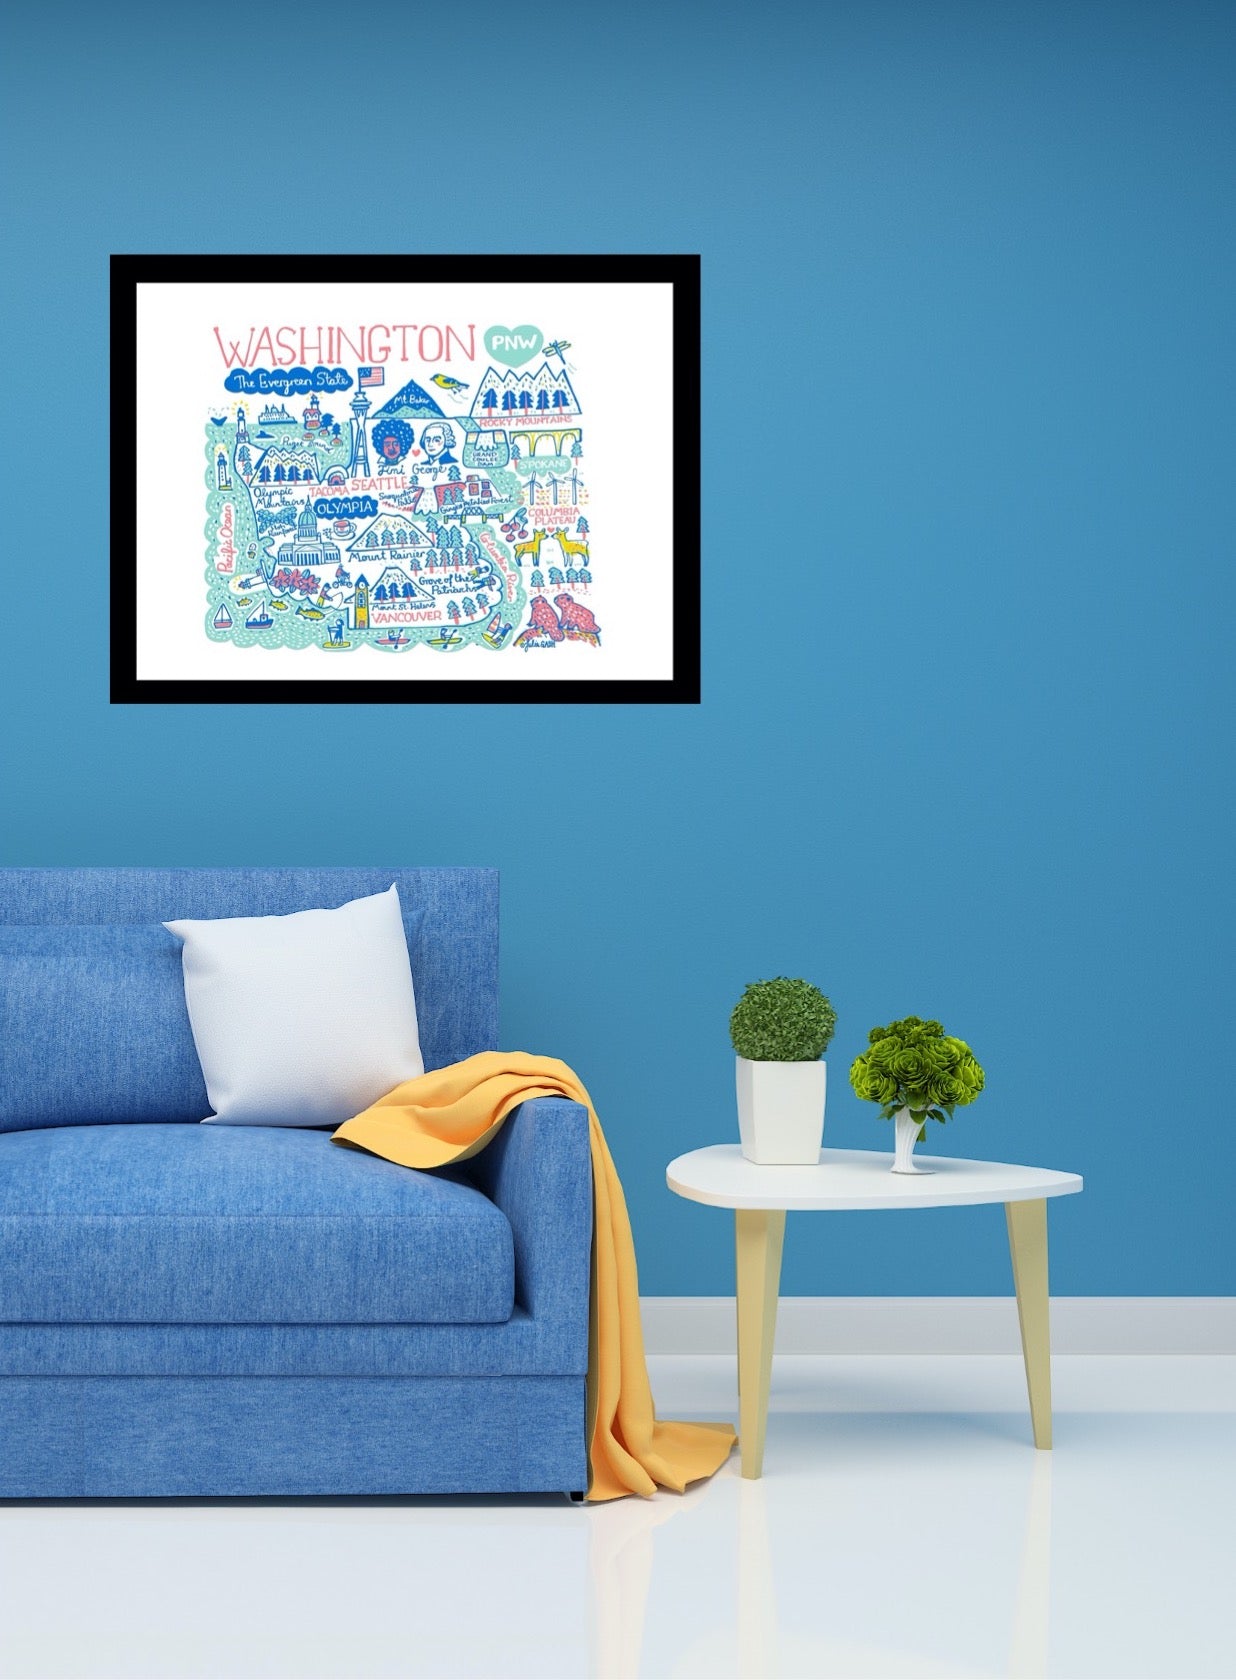 Washington State Map Illustration Print by Julia Gash featuring Seattle, Olympia, Tacoma, Vancouver